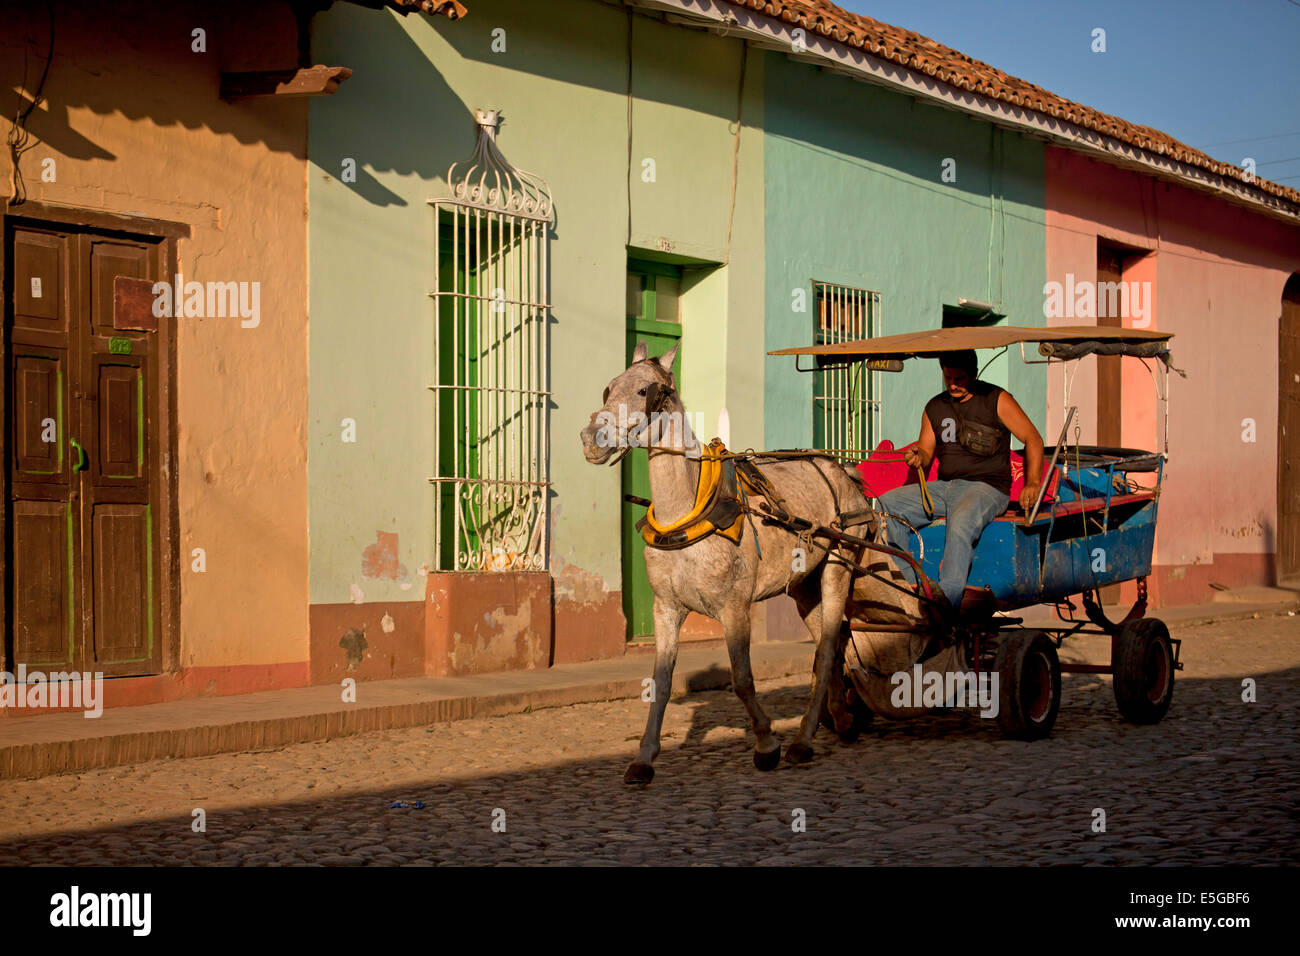 horse carriage in a typical  cobblestone street with colourful homes in the old town of  Trinidad, Cuba, Caribbean Stock Photo